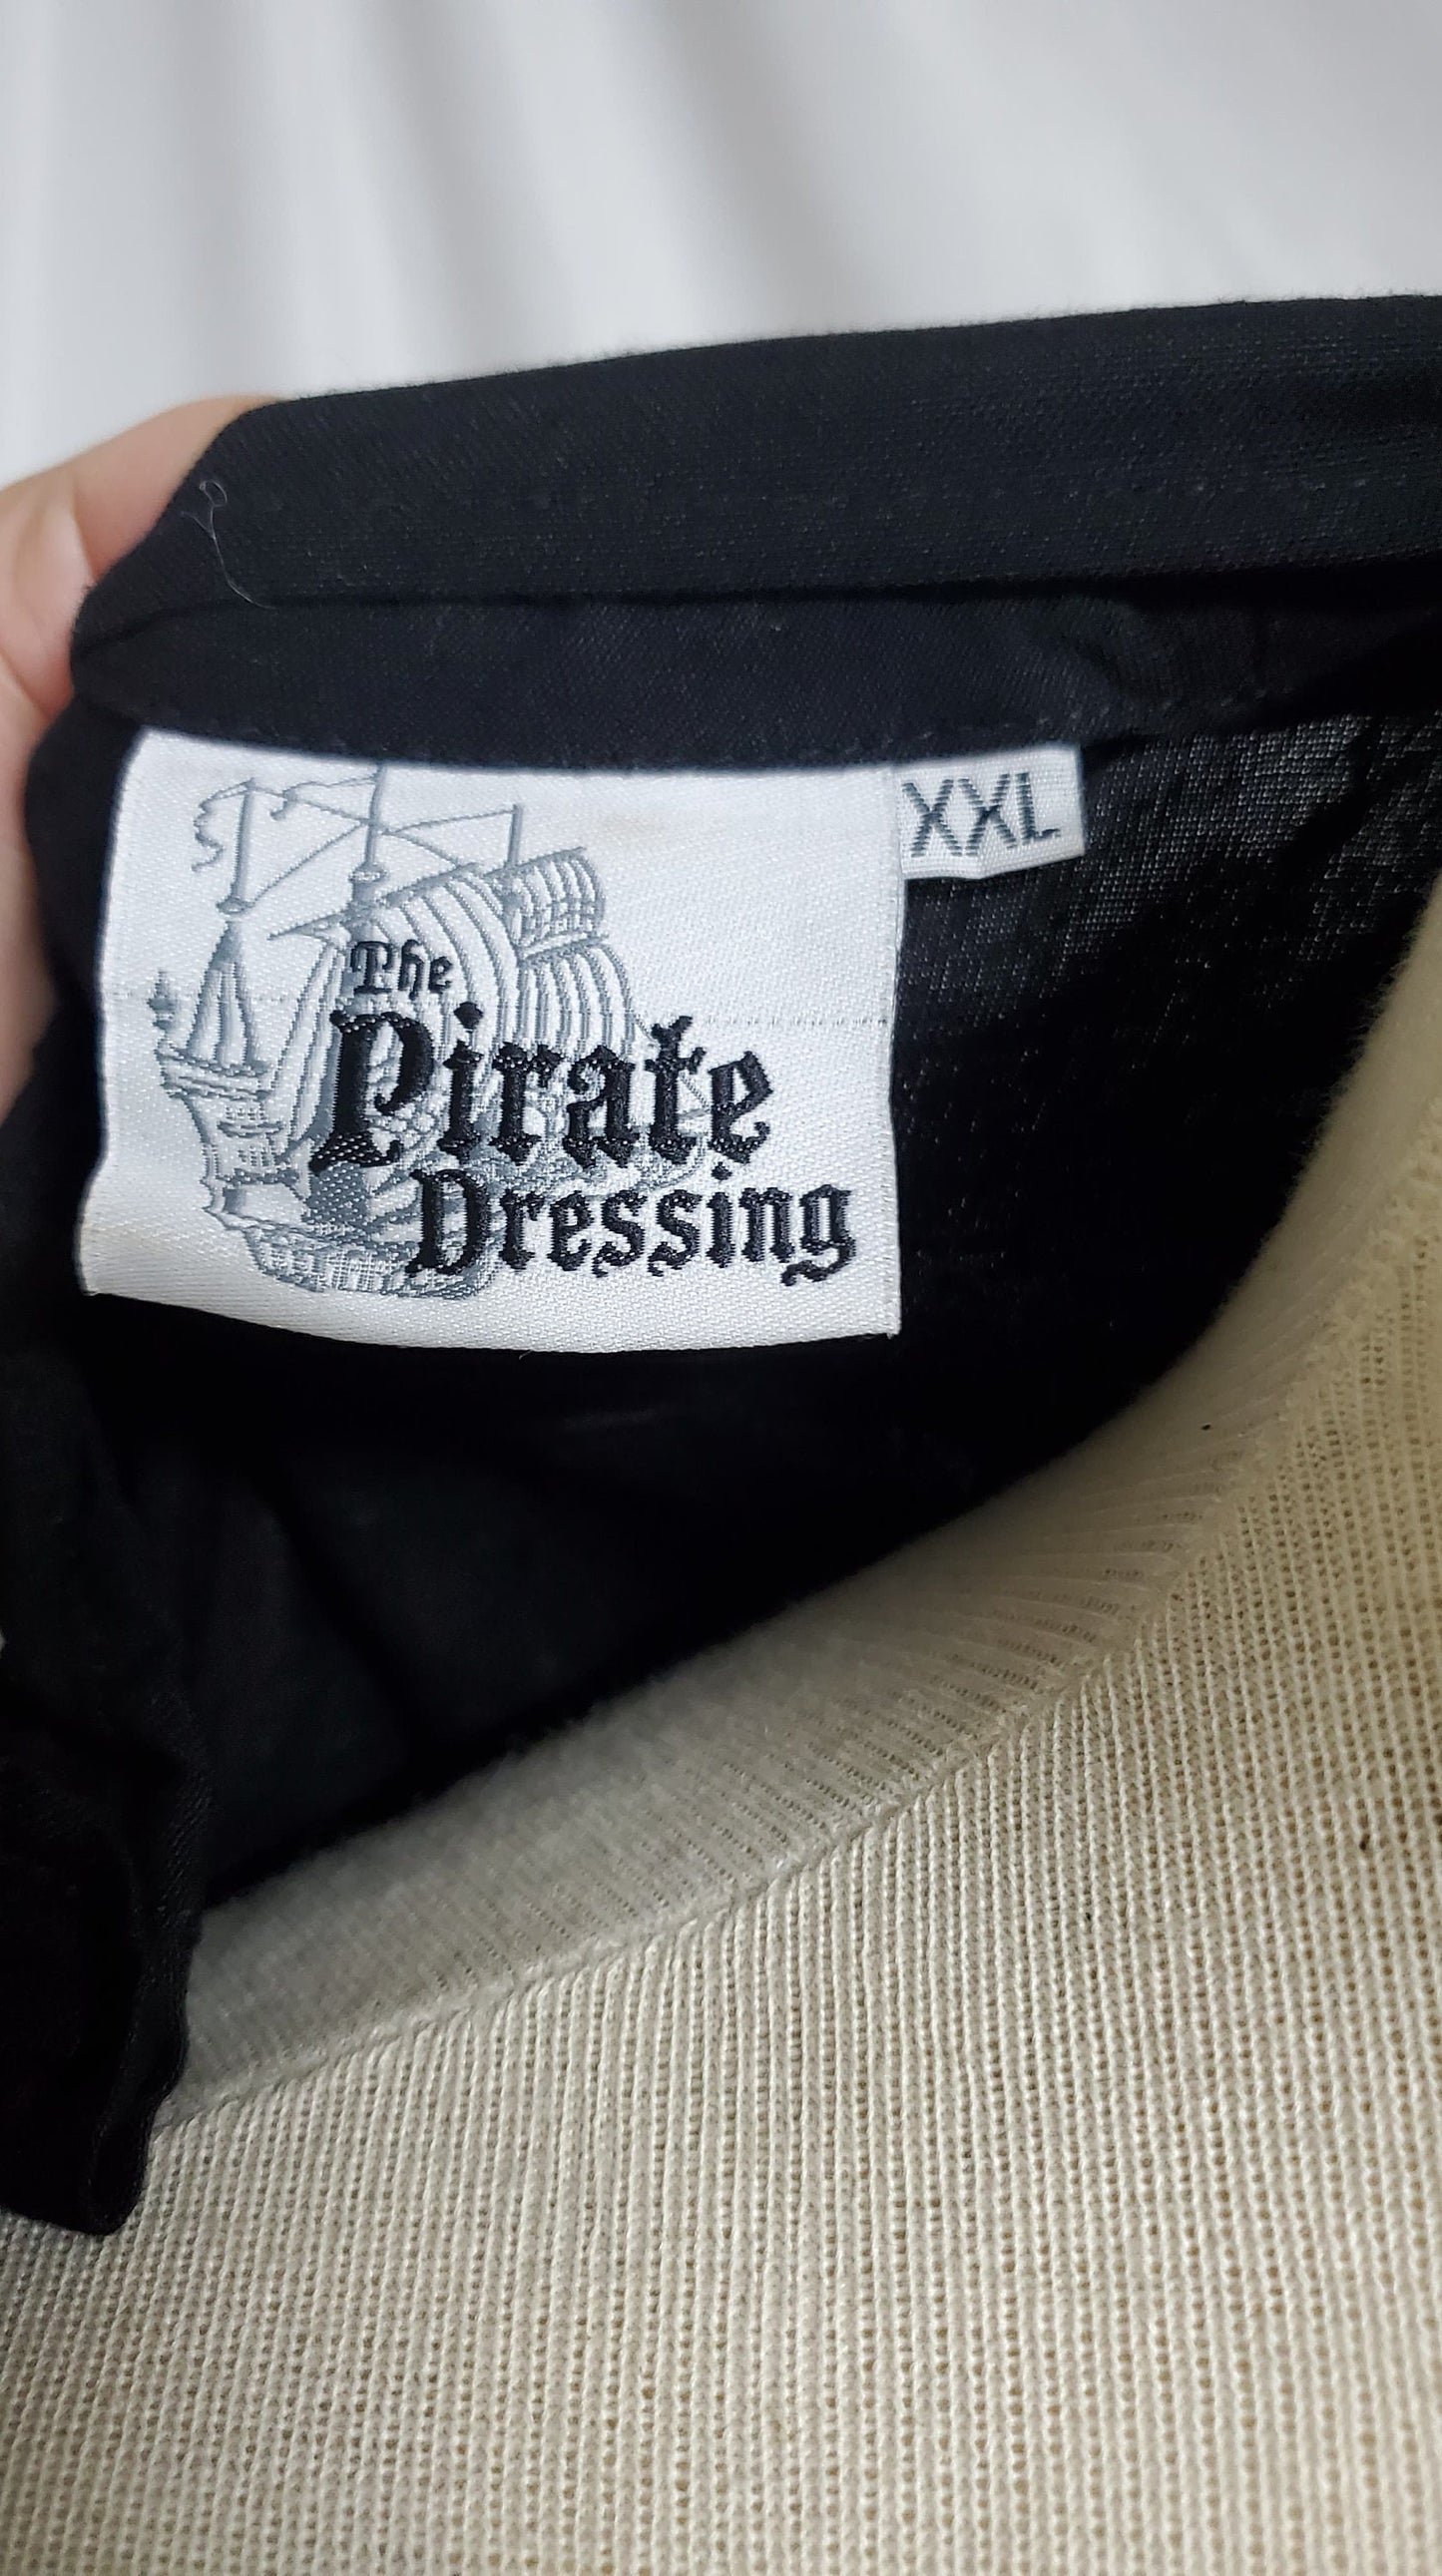 Women's Pirate Shirt in Black 2xl Lord and Lady Towers